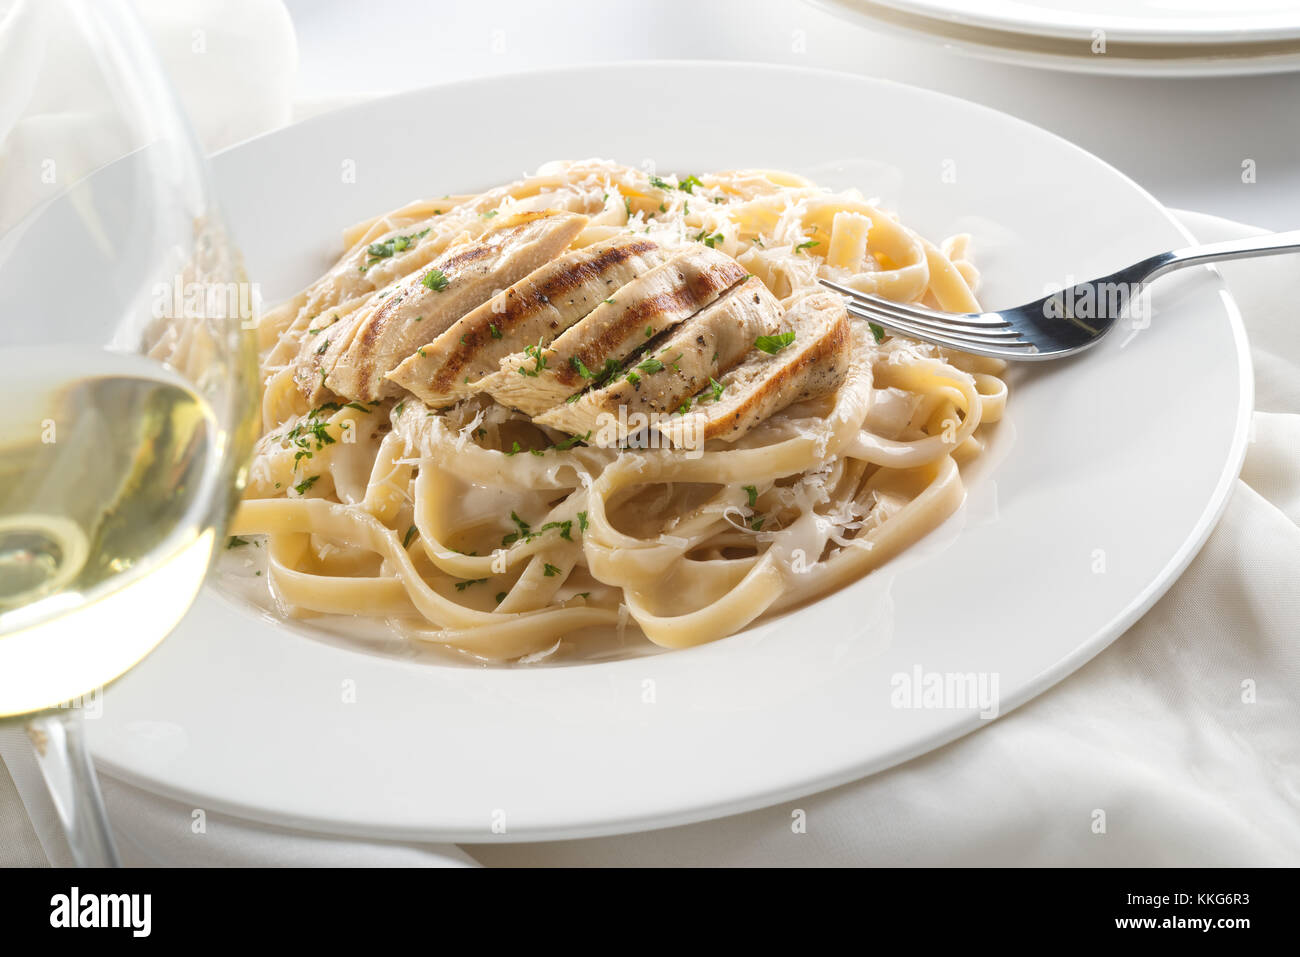 Delicious grilled chicken alfredo with fettuccine, grated parmigiano reggiano, and chopped parsley garnish. Stock Photo